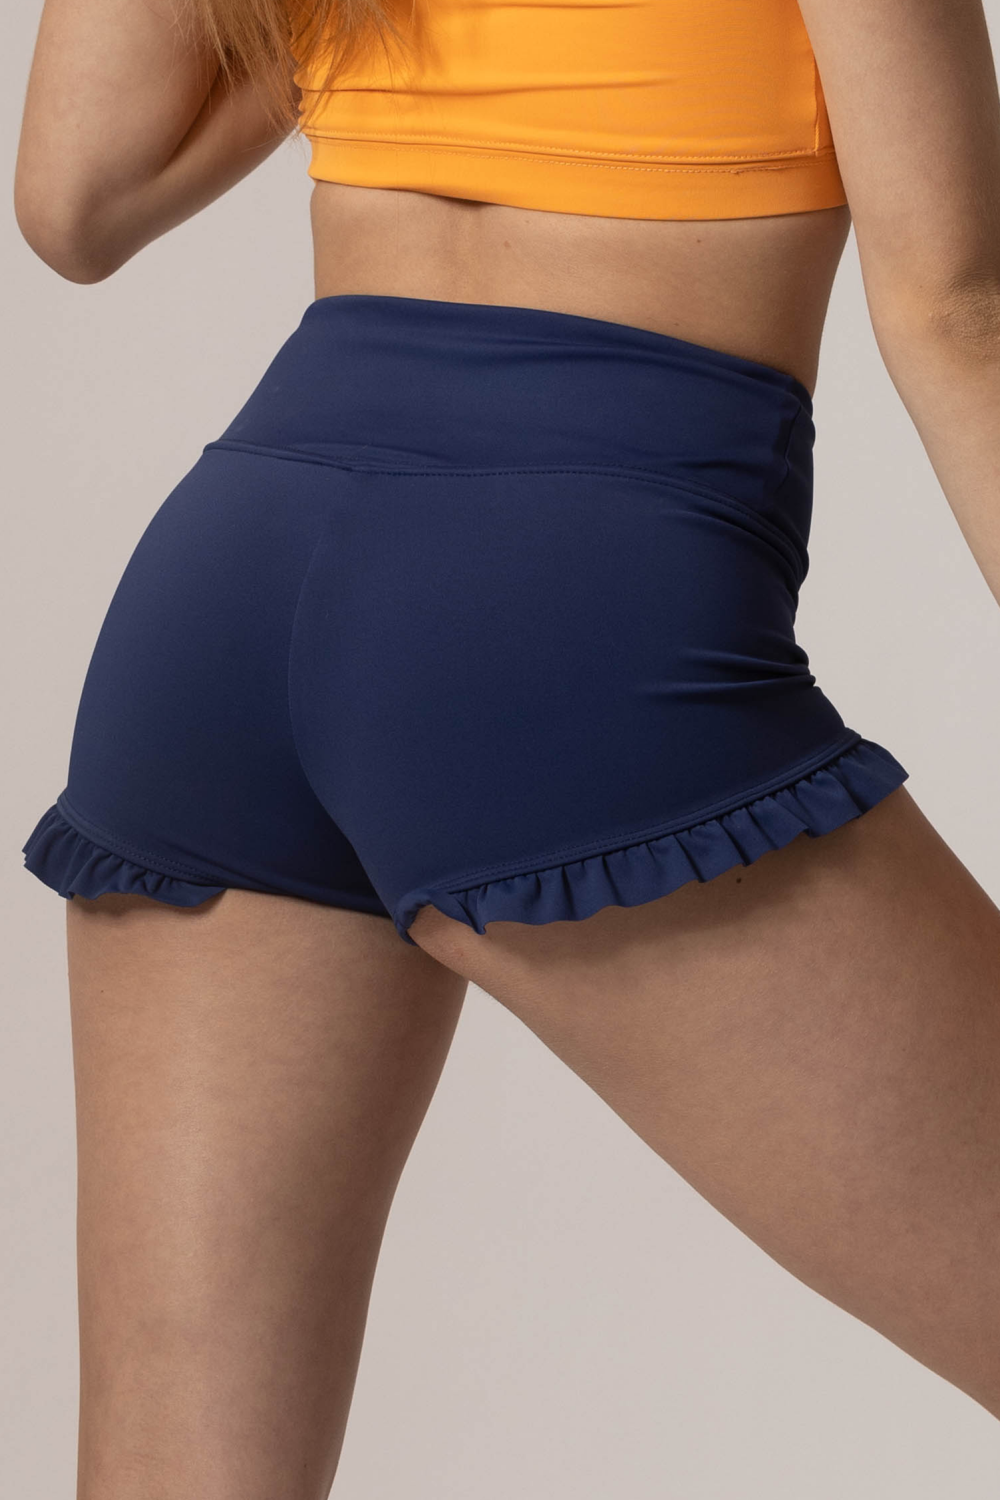 TigerFriday Filly Bootie Shorts - Blue Jay CXS